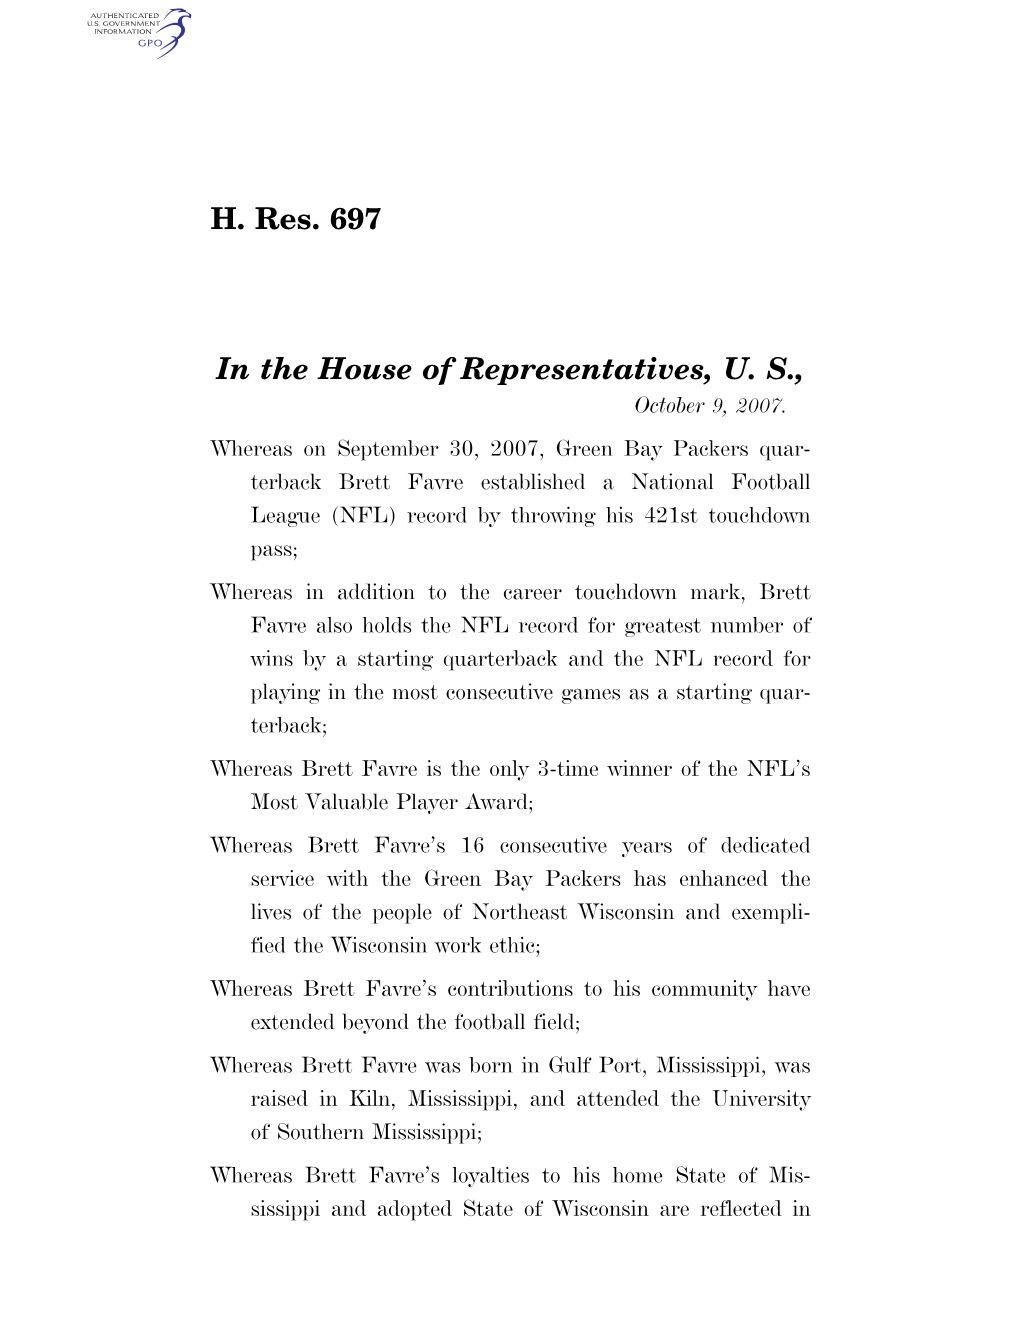 H. Res. 697 in the House of Representatives, U